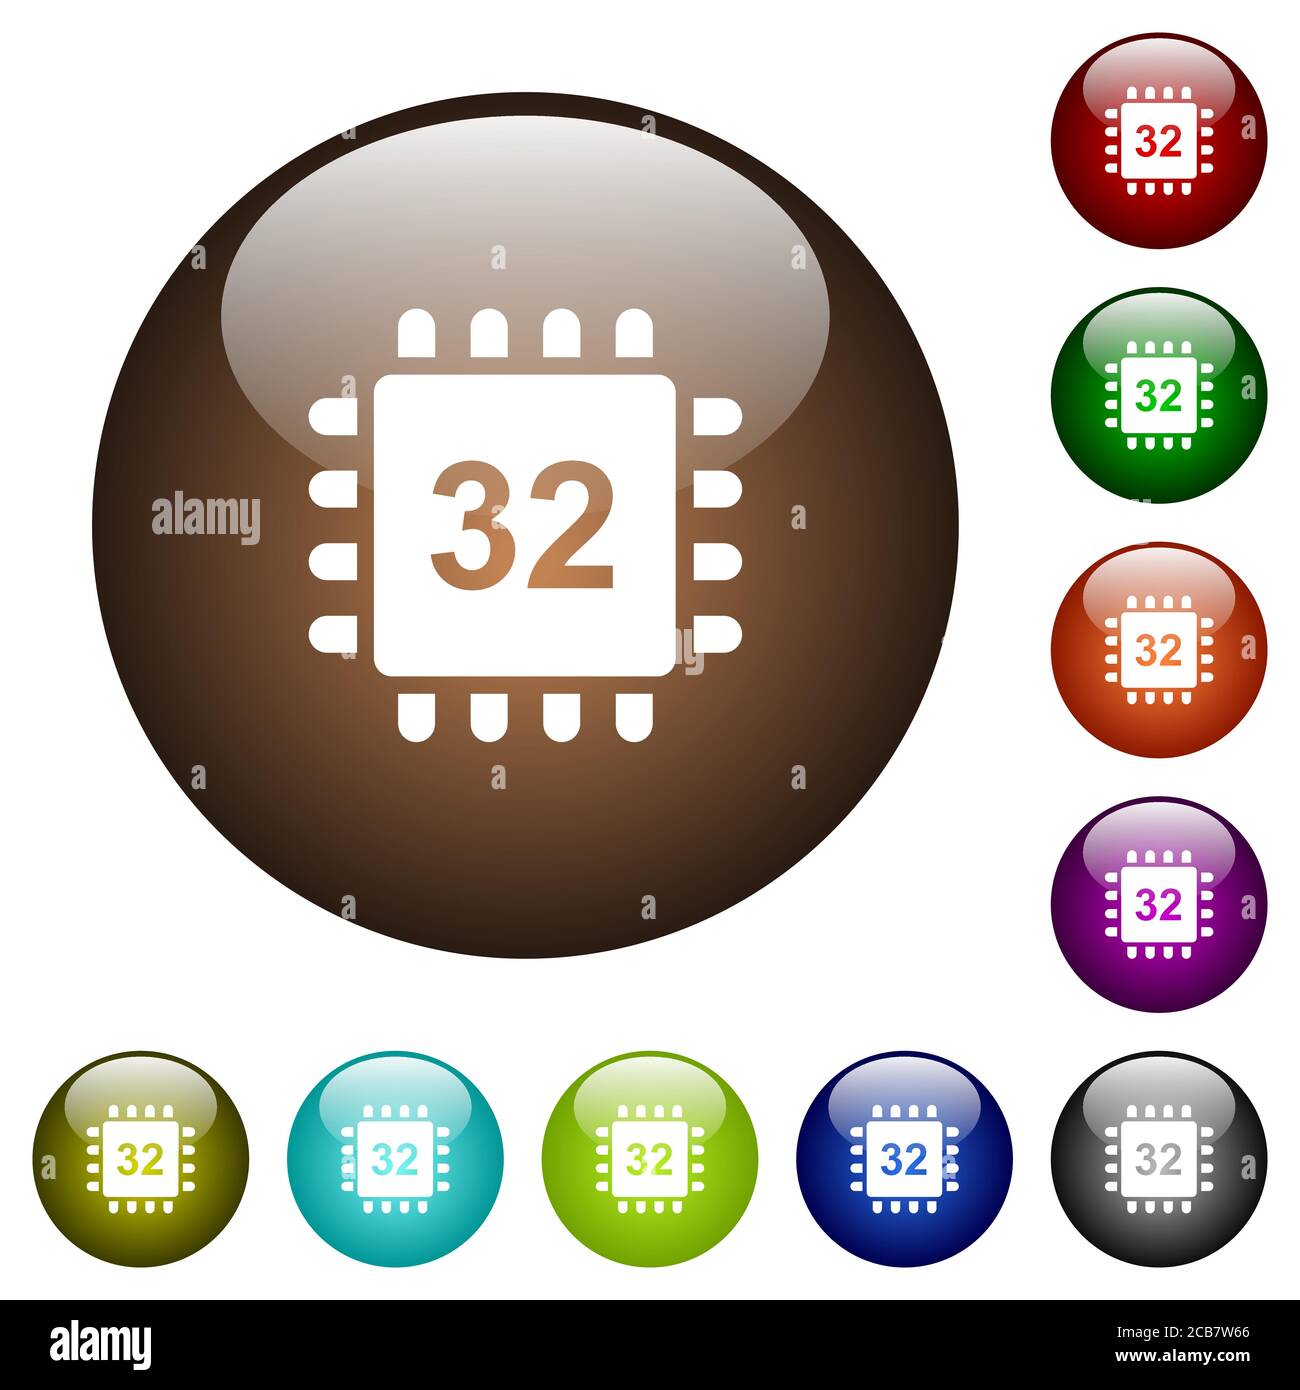 Microprocessor 32 bit architecture white icons on round glass buttons in multiple colors Stock Vector